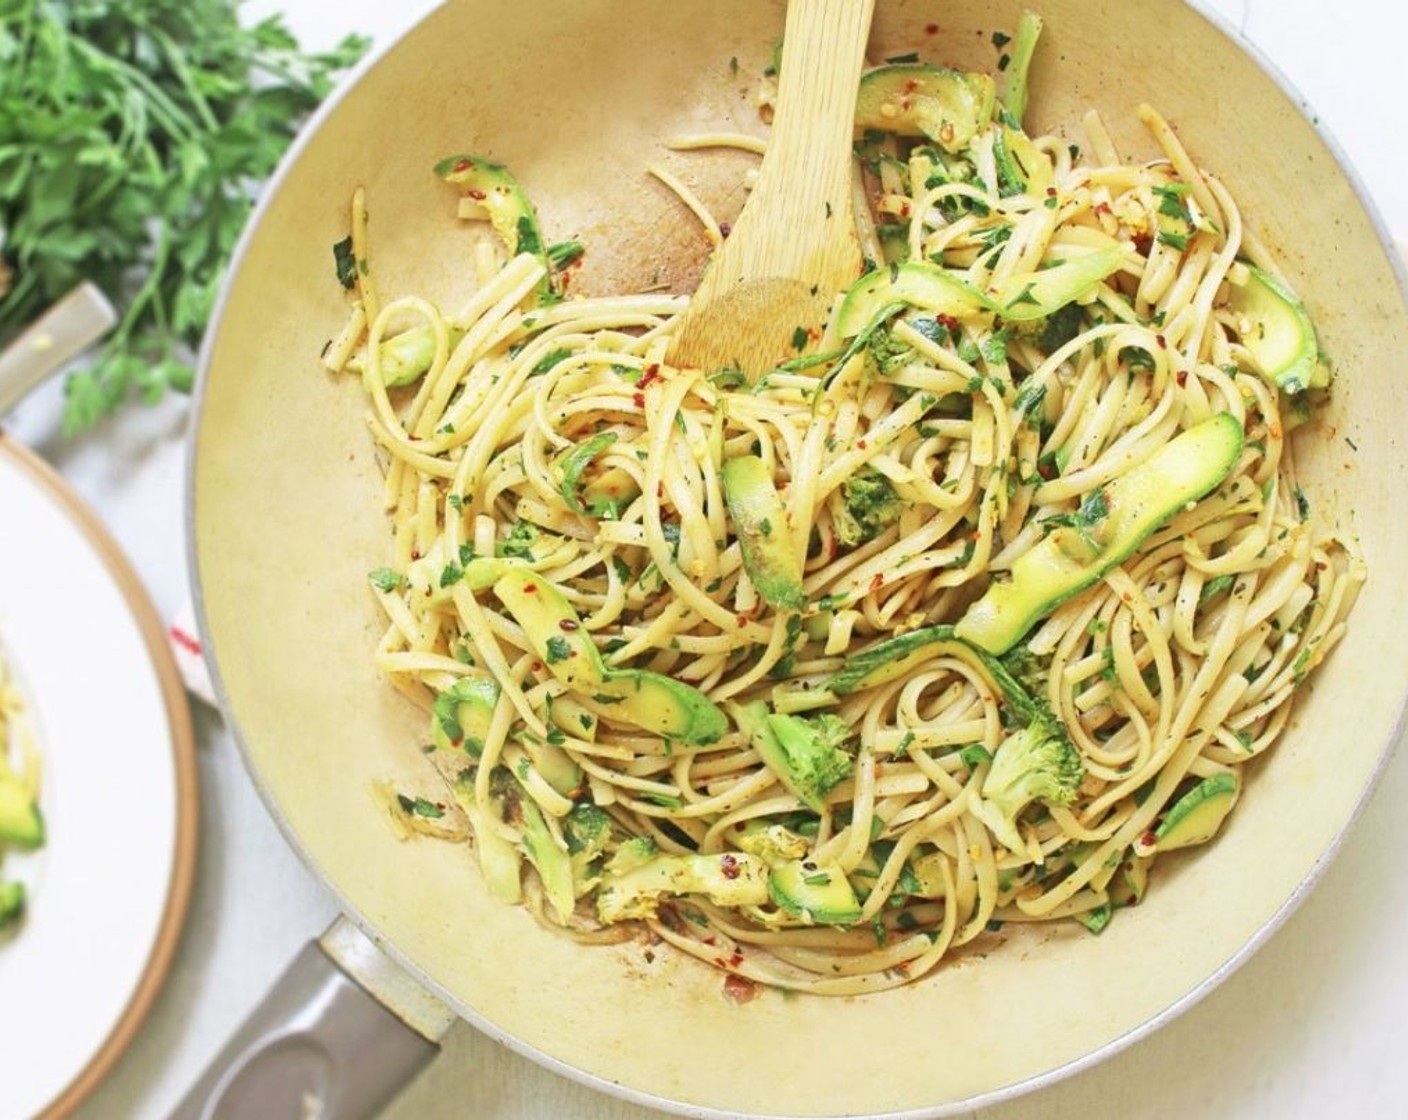 Garlic Linguine with Courgette and Broccoli